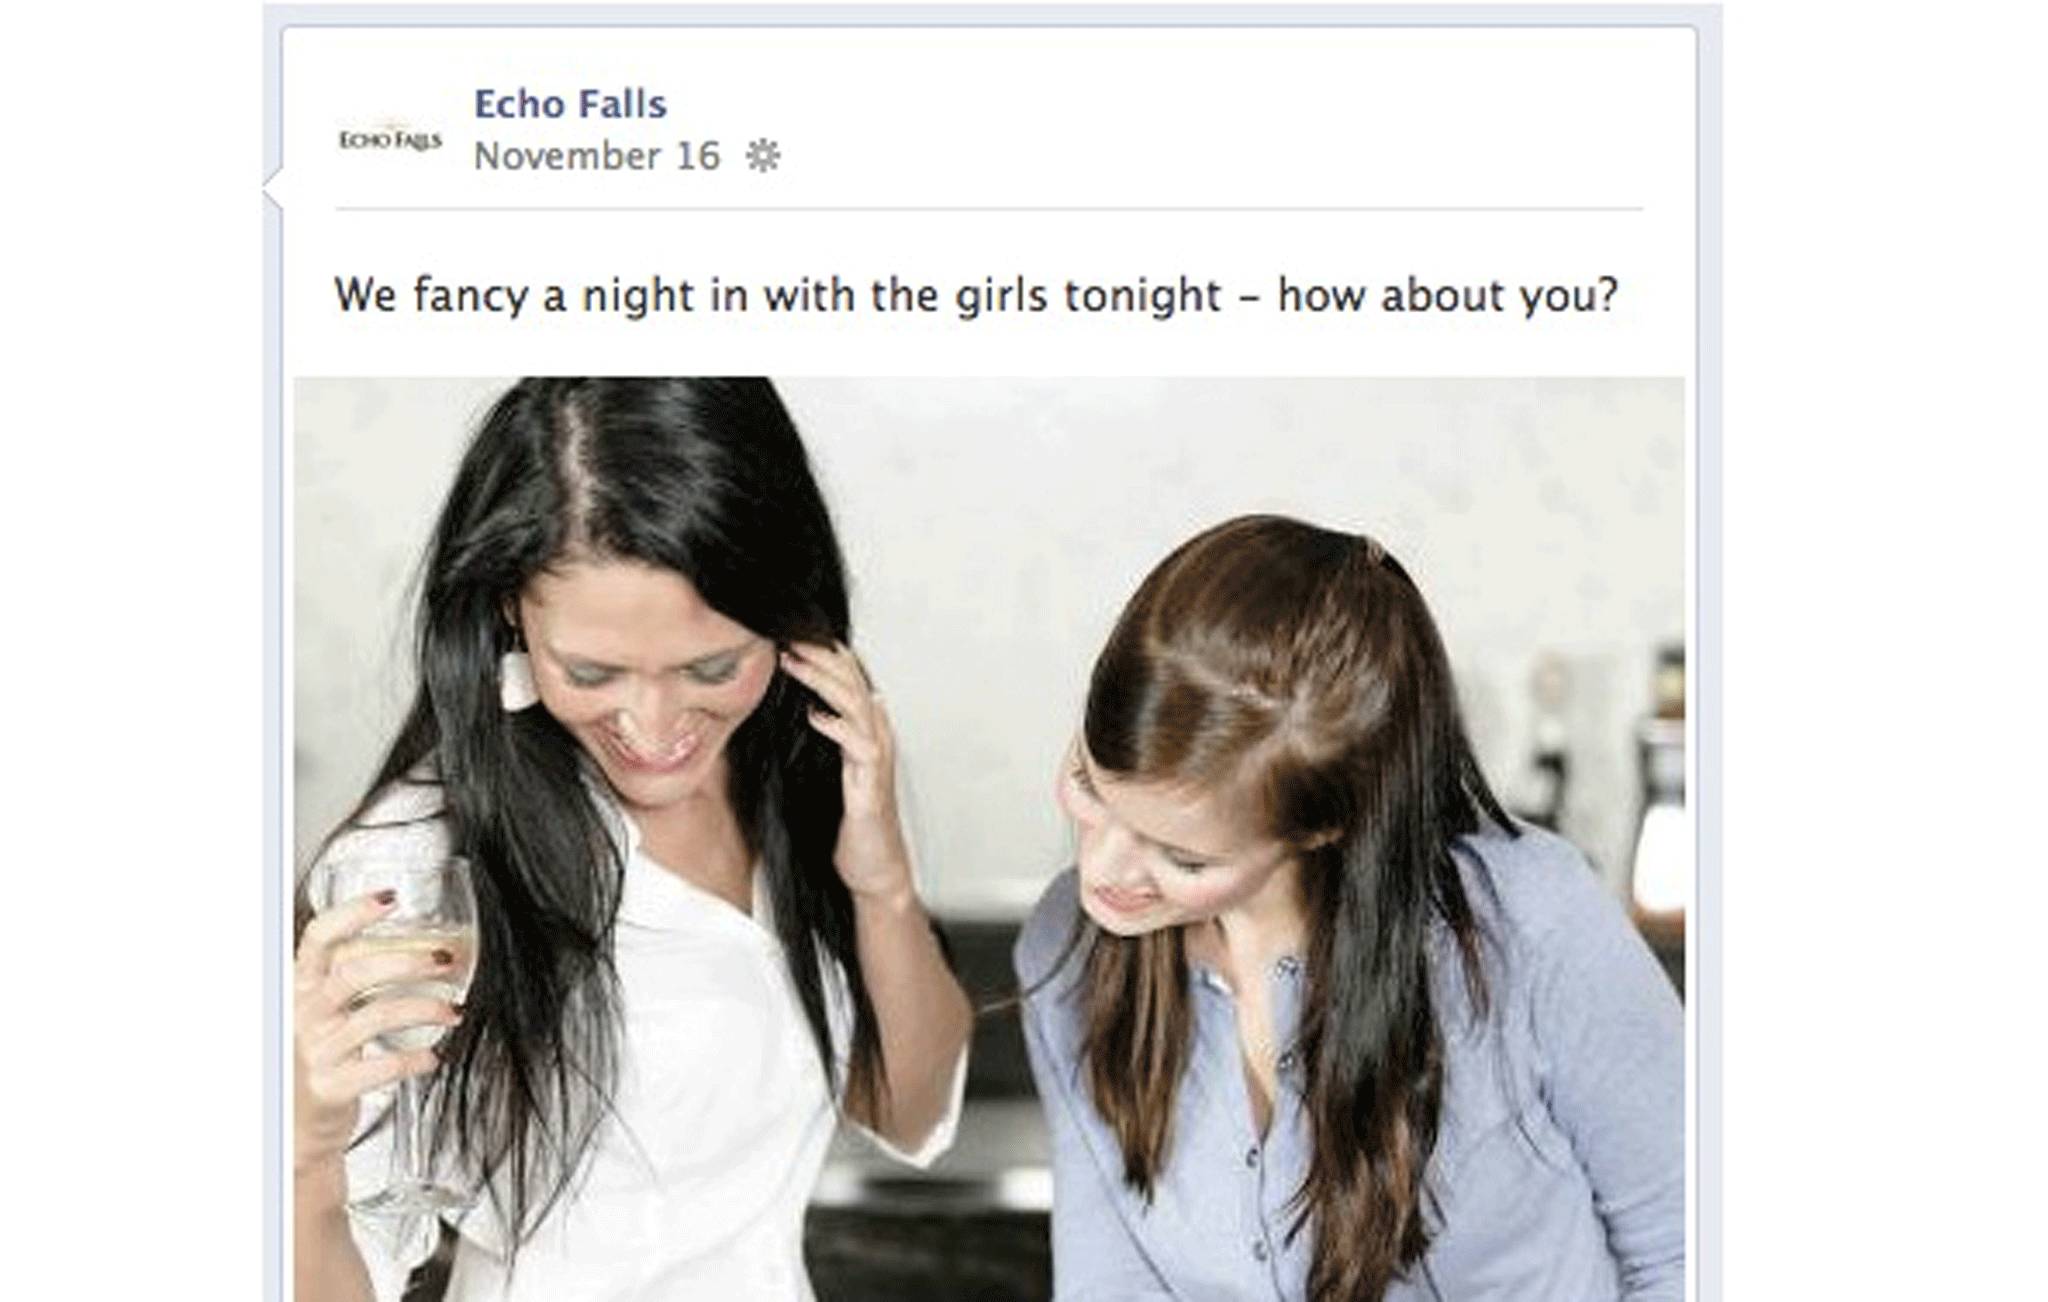 The entire staff of Echo Falls are looking forward to a night in with the girls, apparently